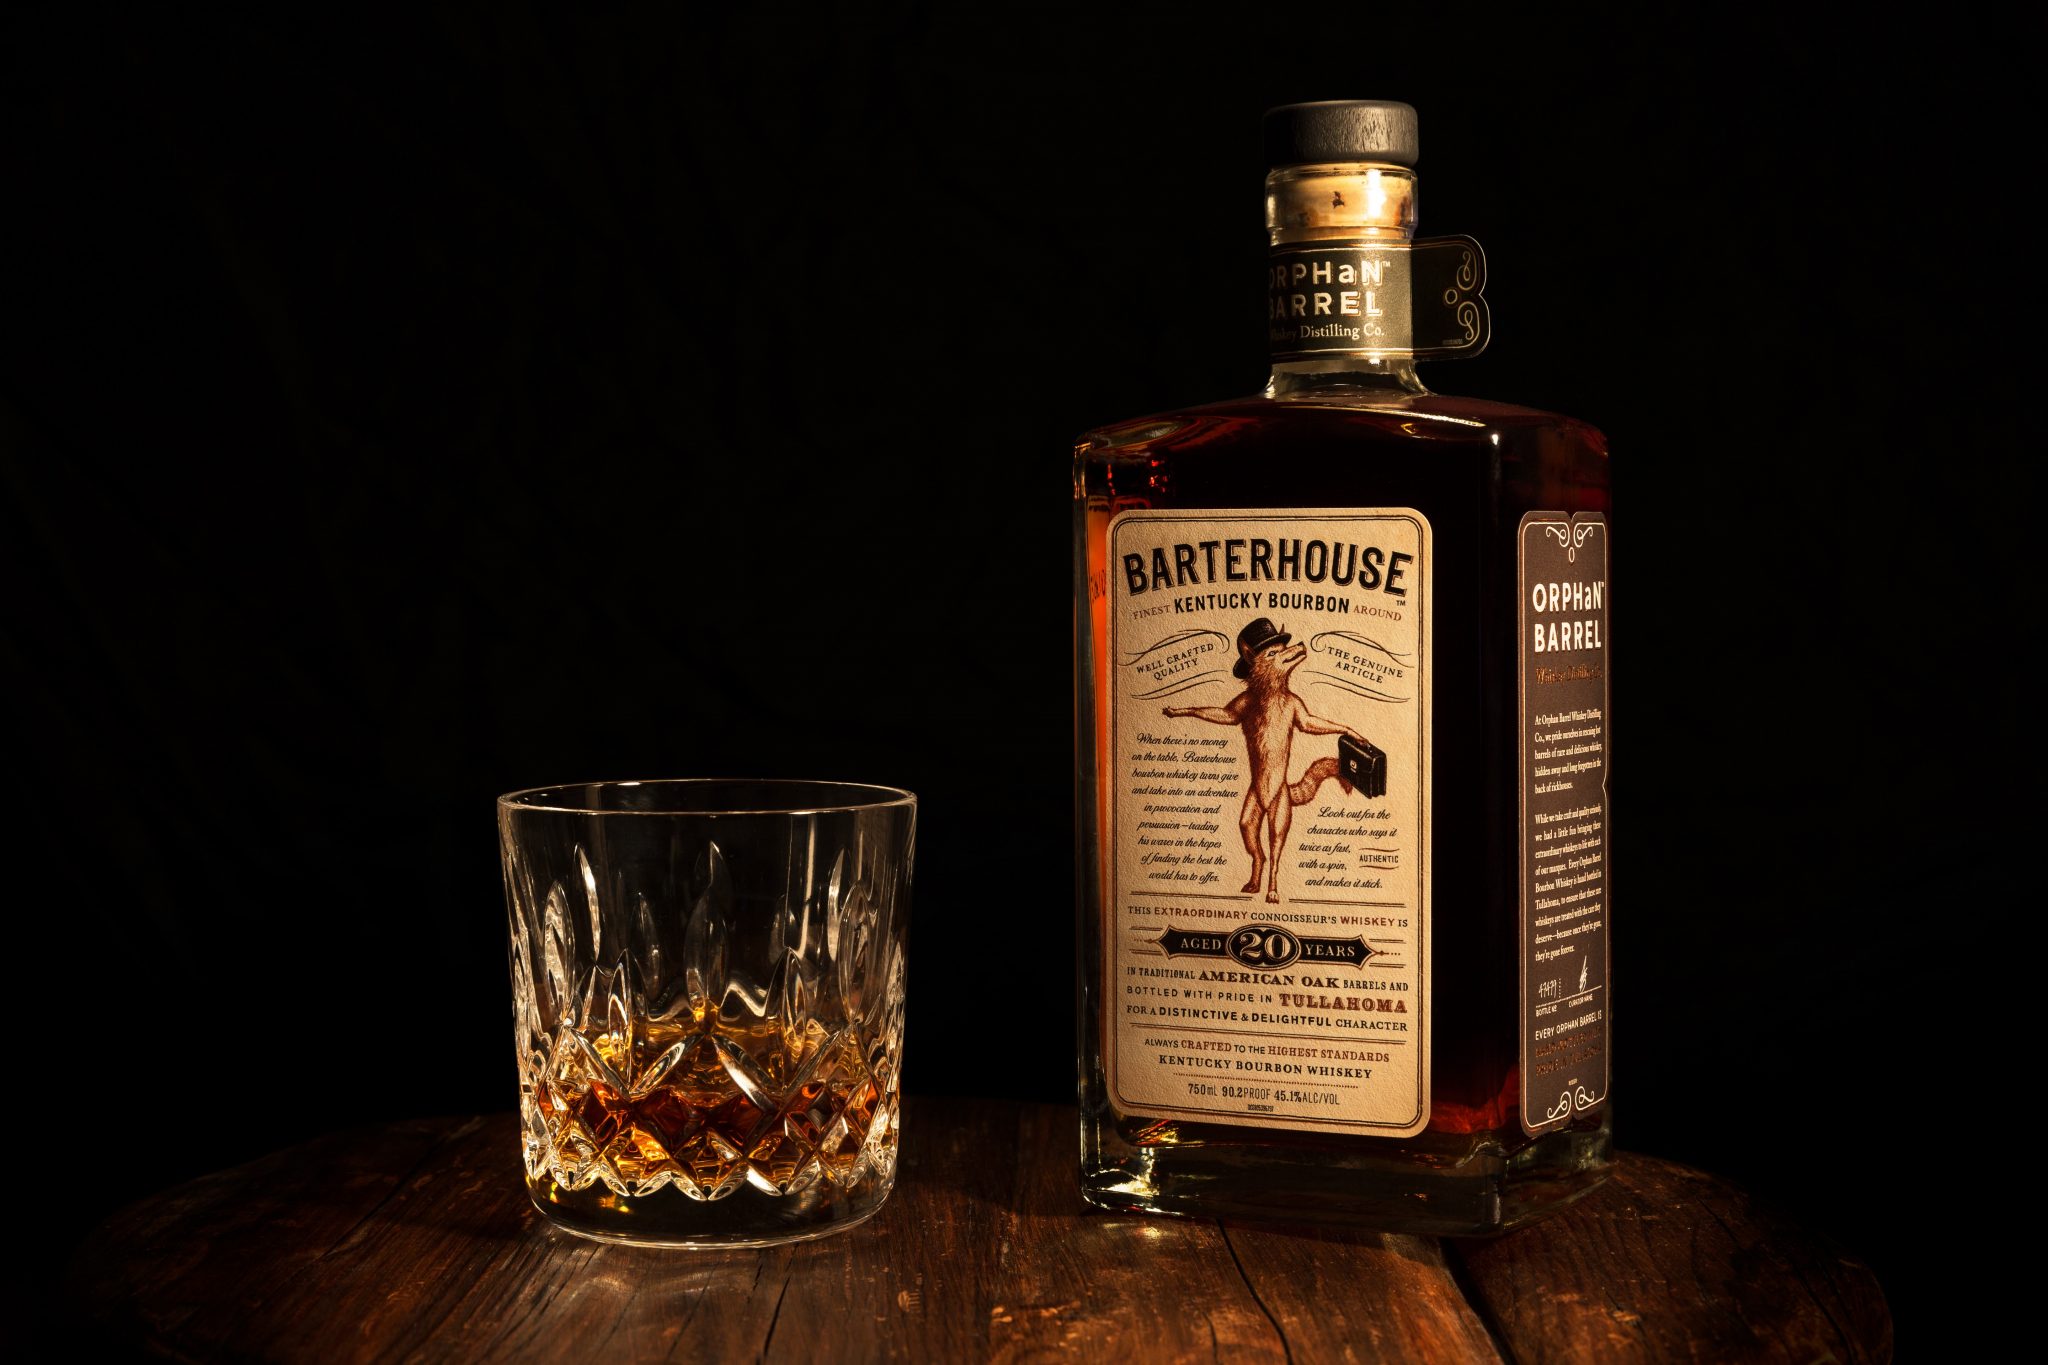 Bartending jack daniels old no 7 tennessee whiskey